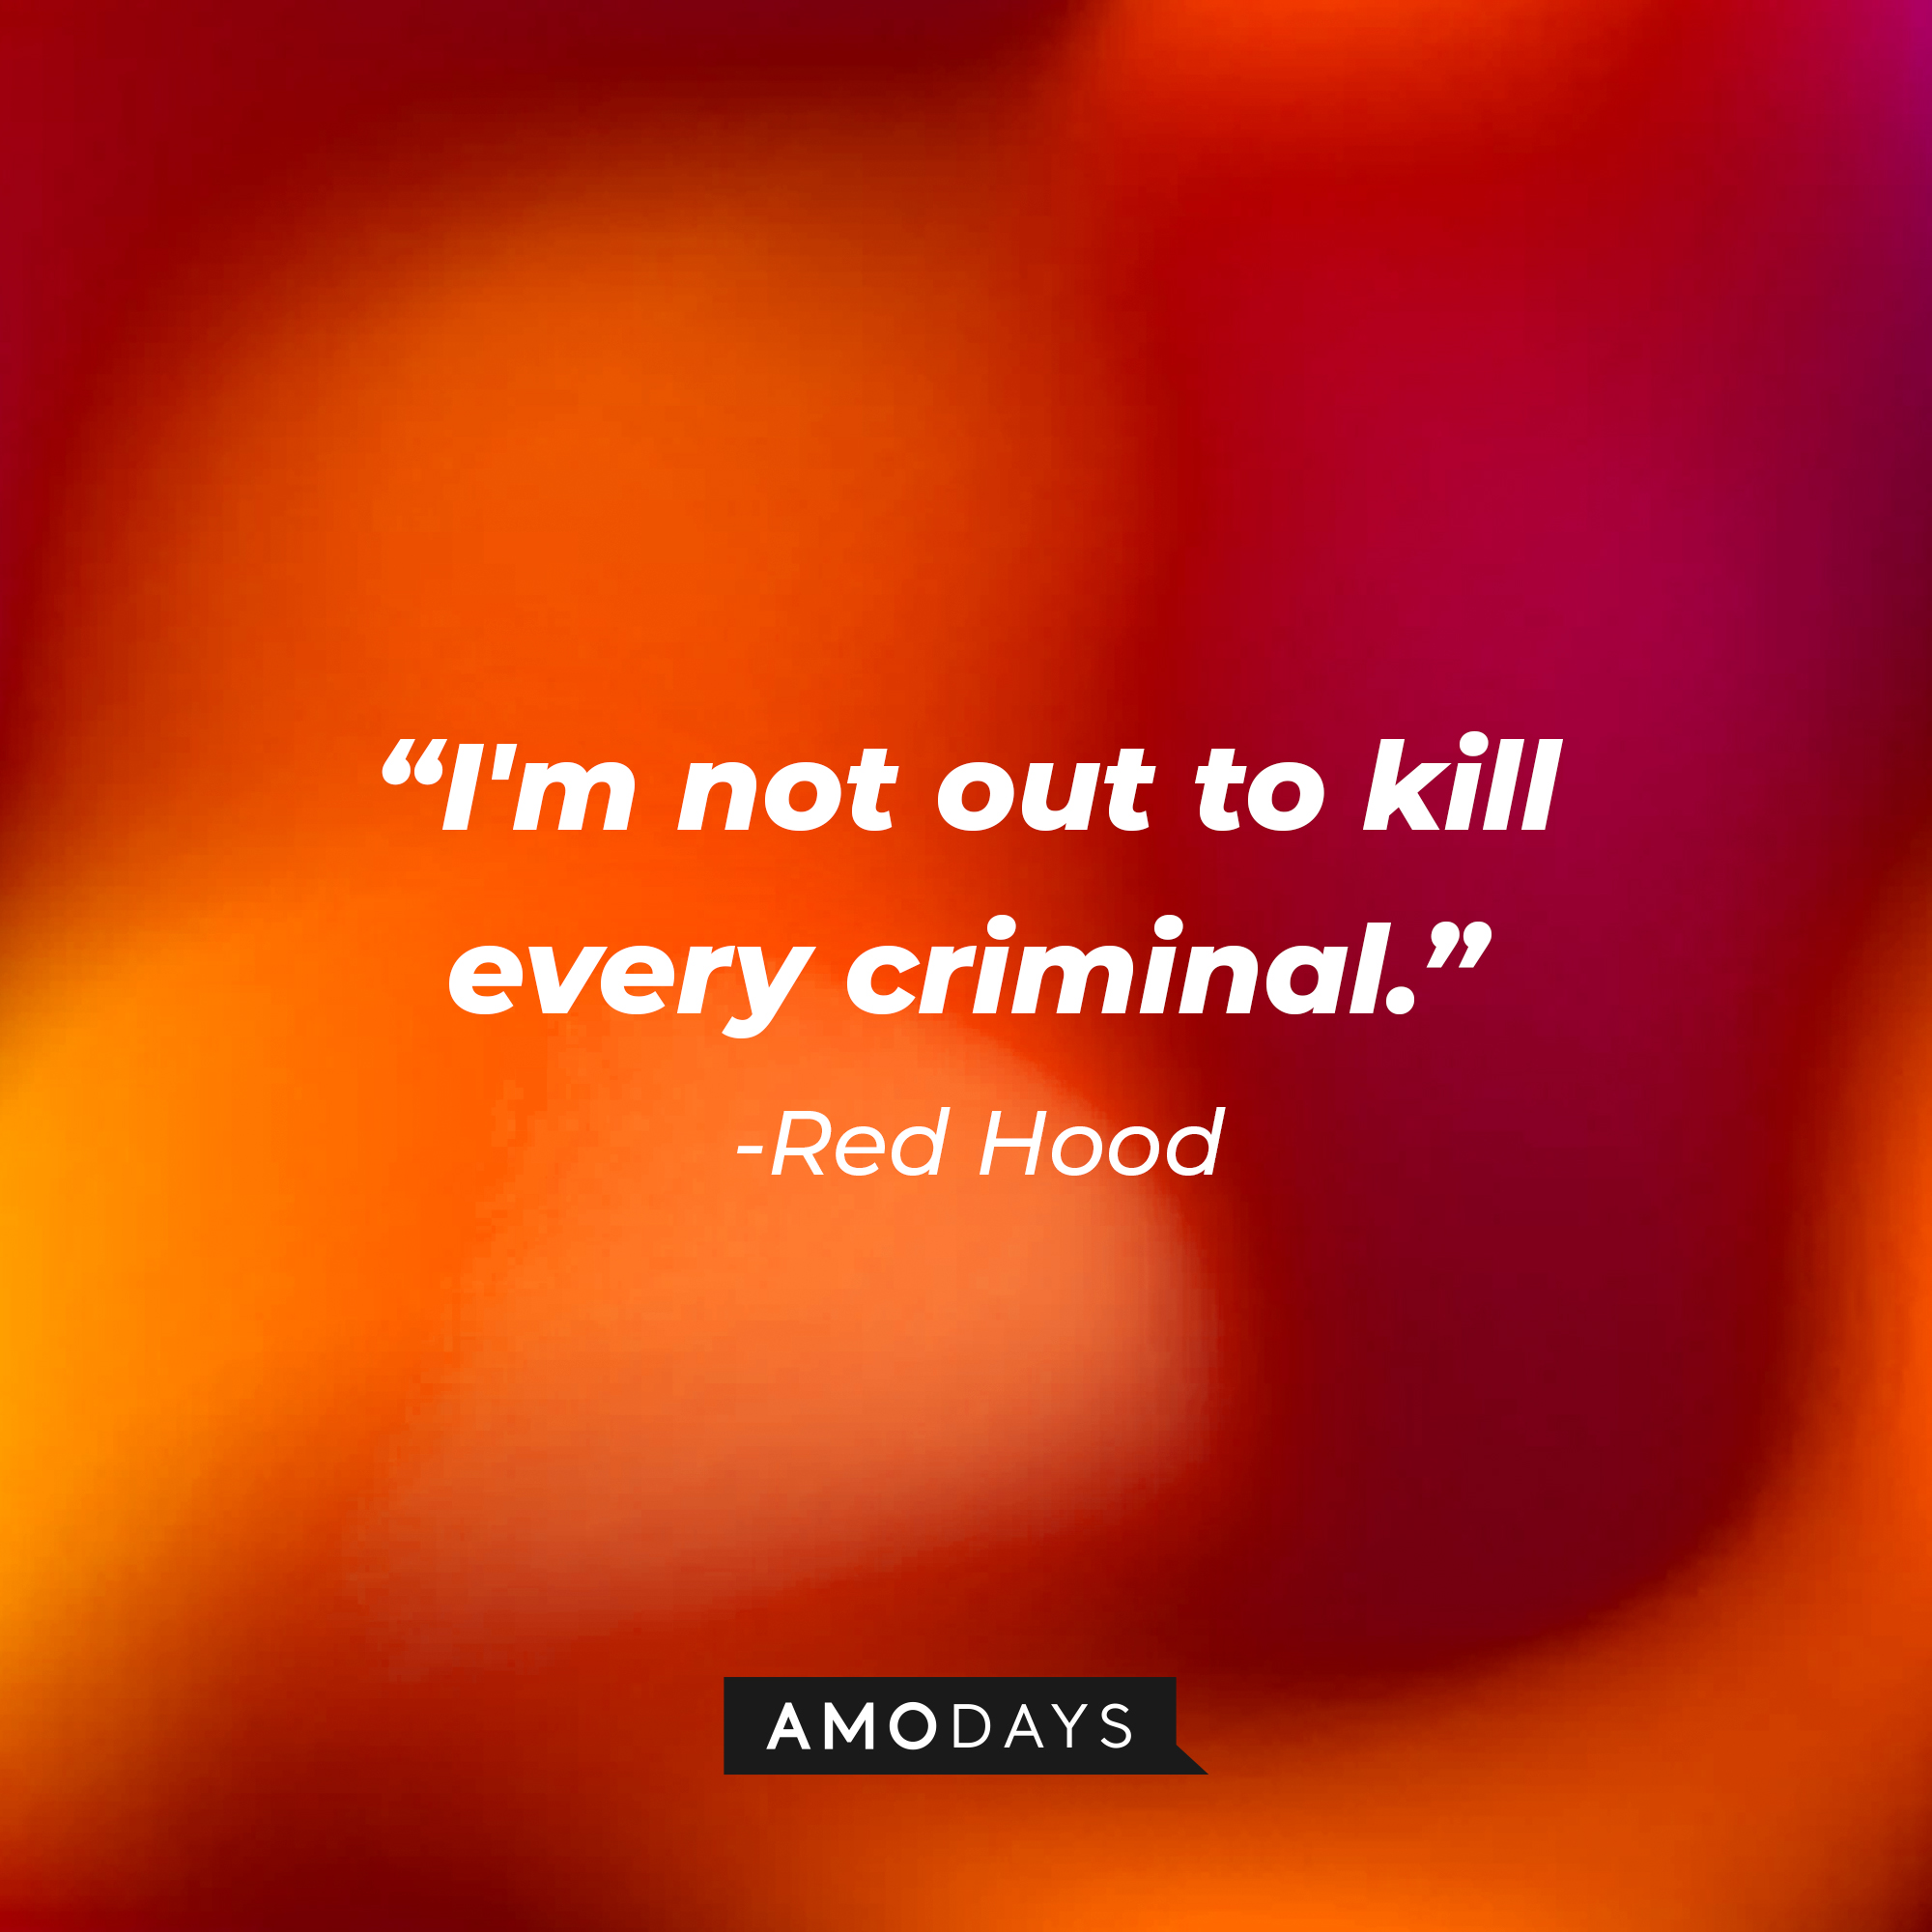 Red Hood’s quote: "I'm not out to kill every criminal." | Source: AmoDays